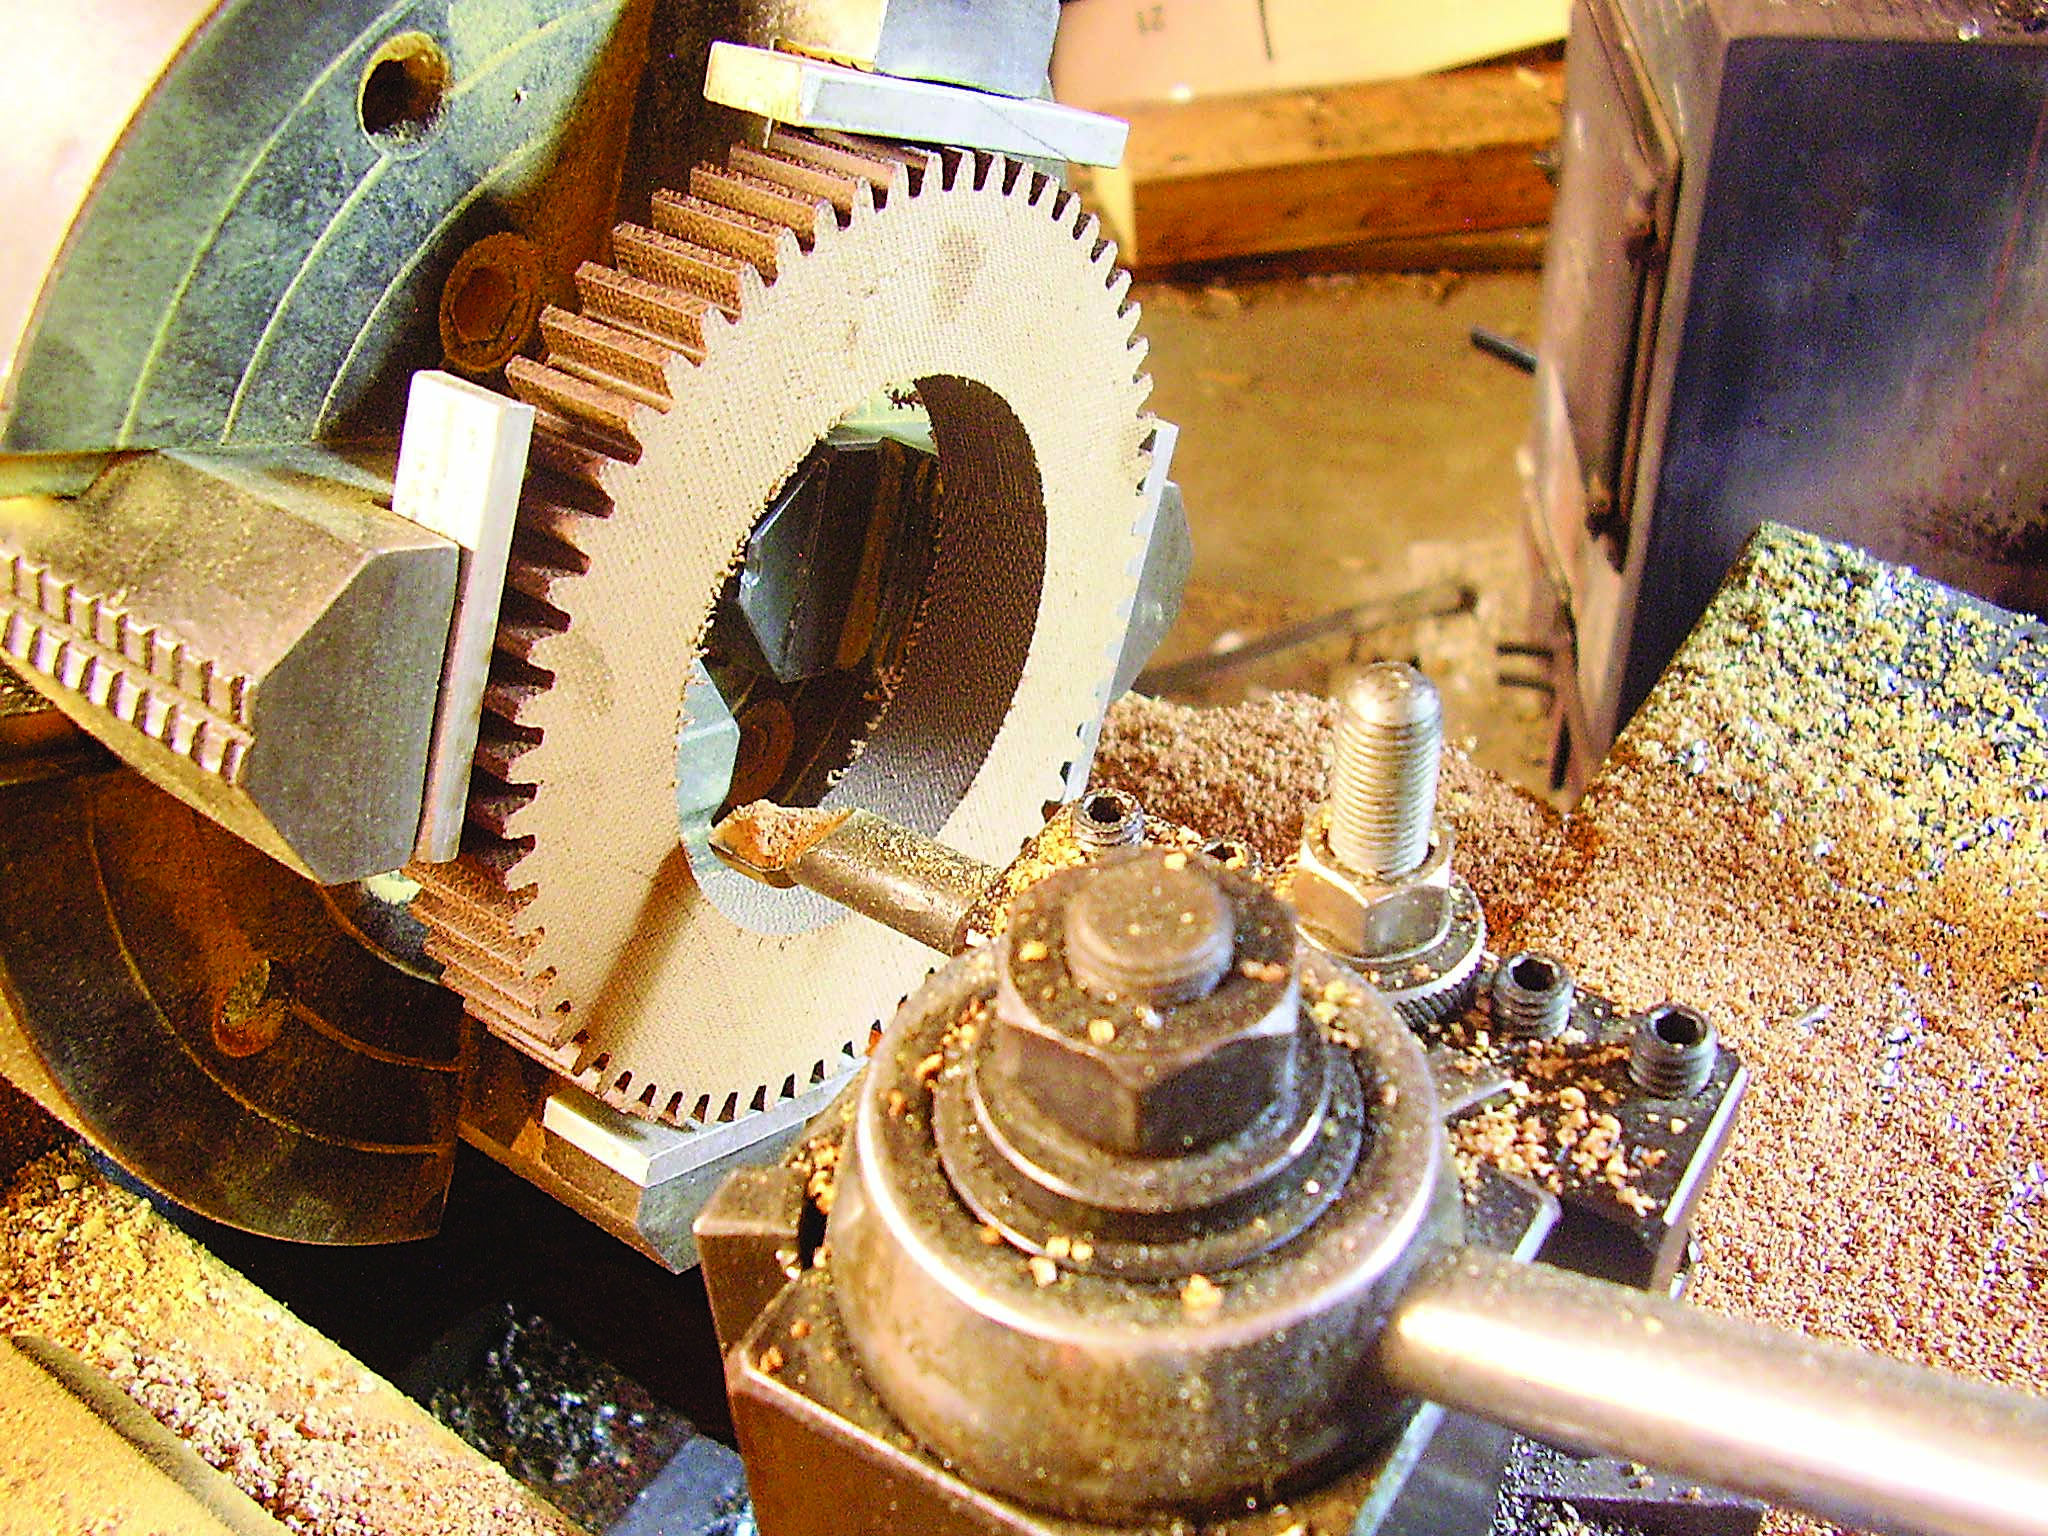 Pieces of aluminum stock are placed between the chuck jaws and the gear teeth.